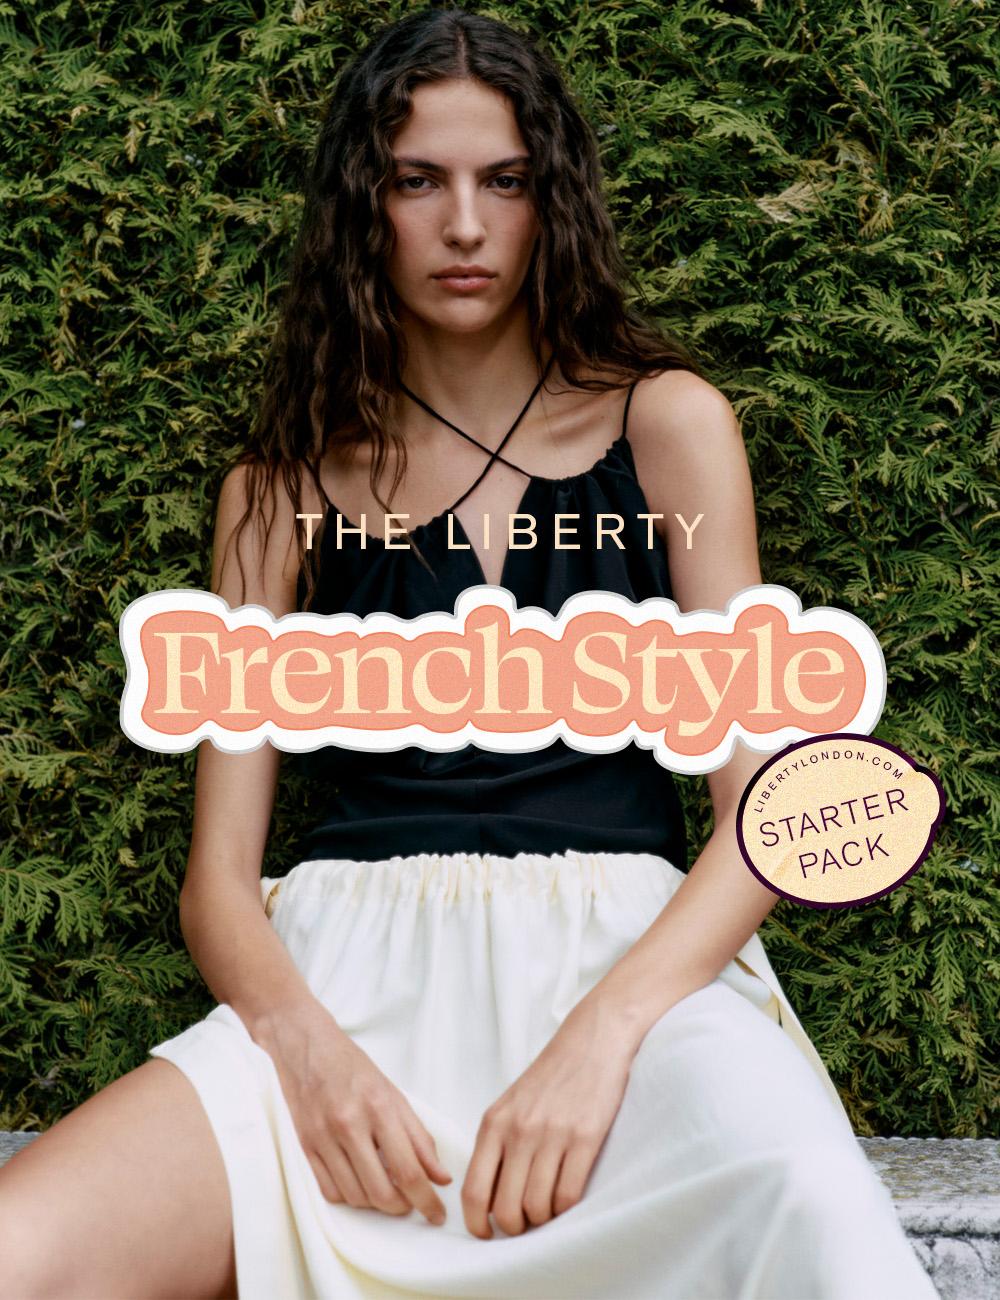 How to Master French Girl Style